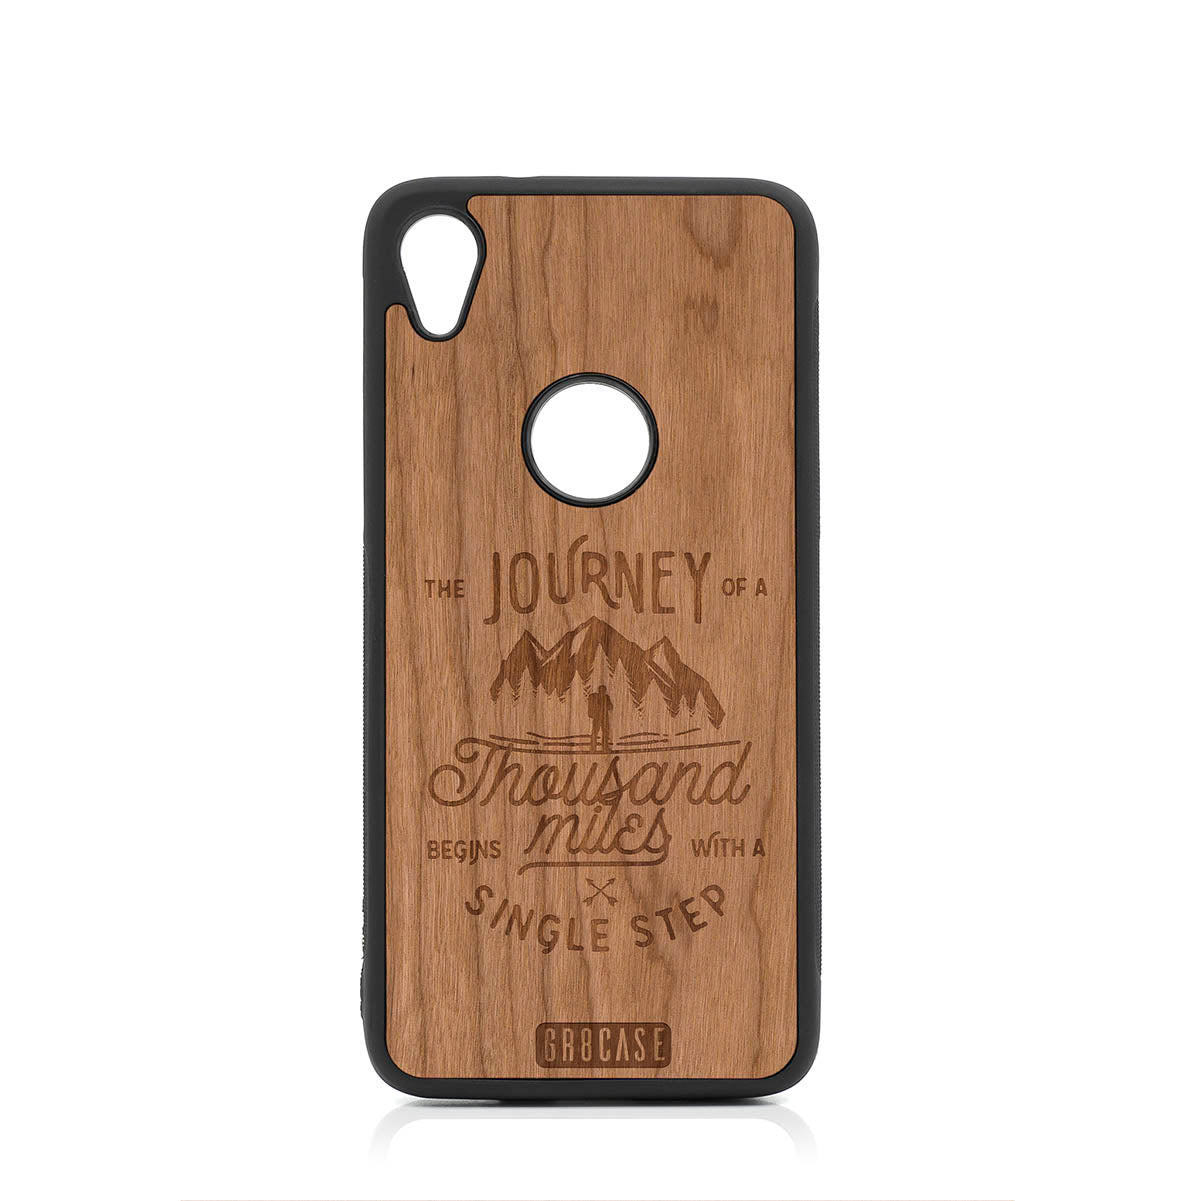 The Journey Of A Thousand Miles Begins With A Single Step Design Wood Case For Moto E6